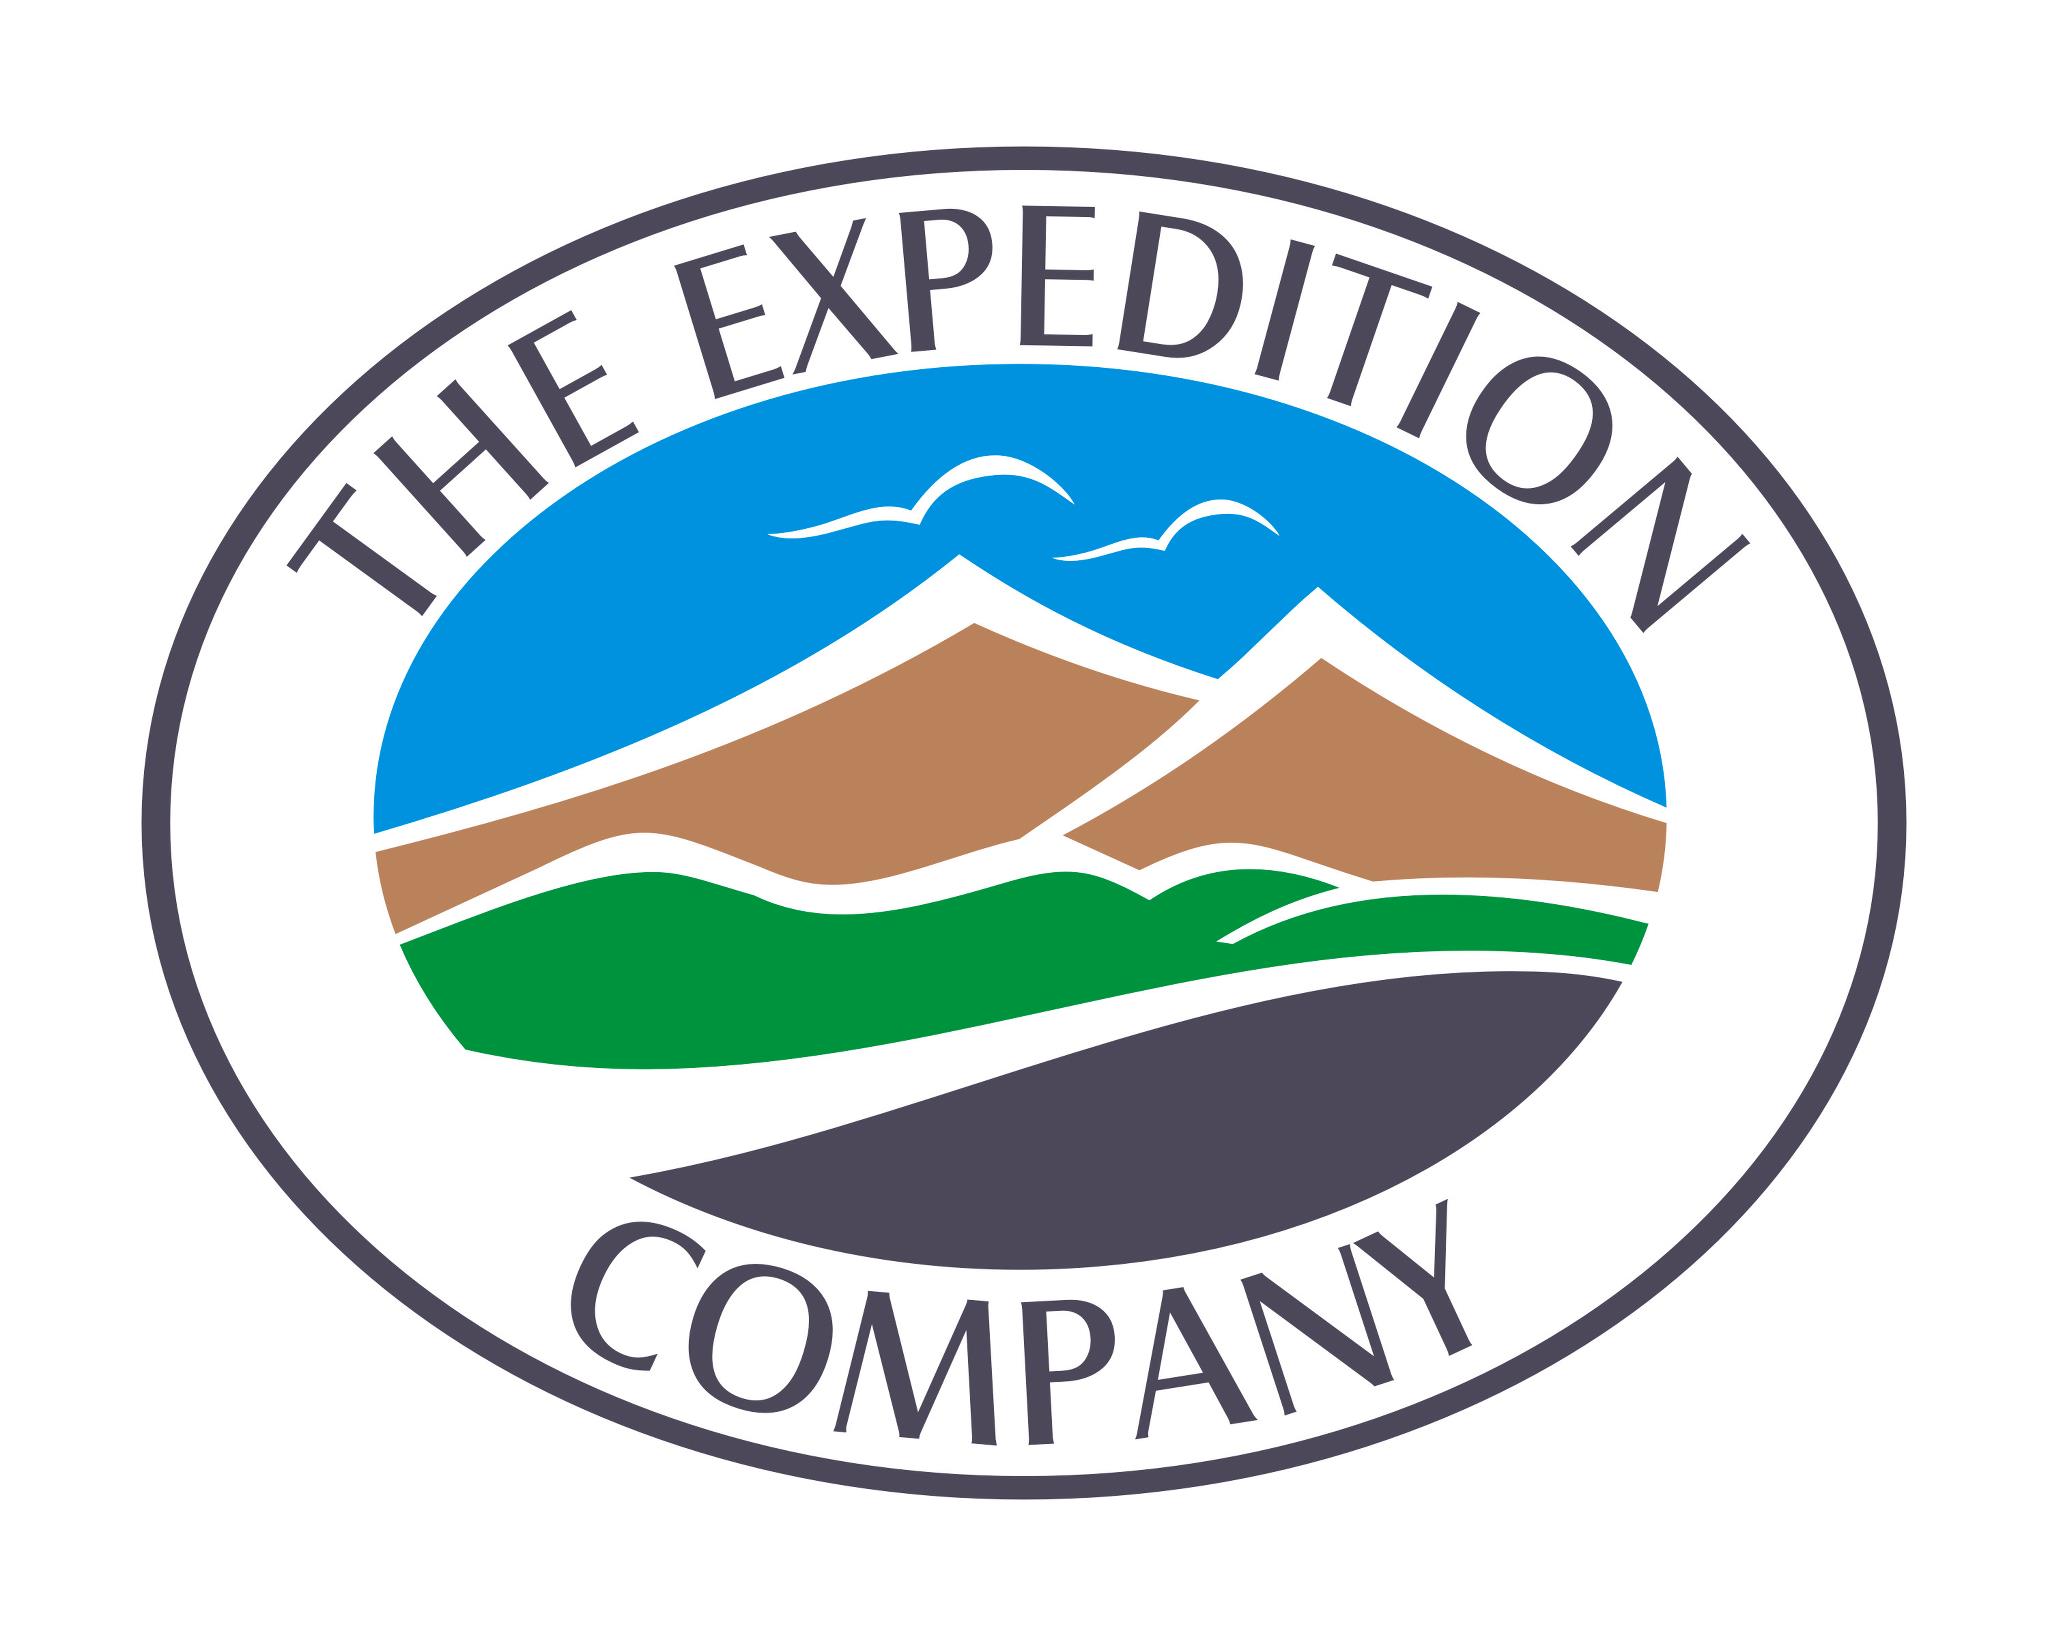 The Expedition Company